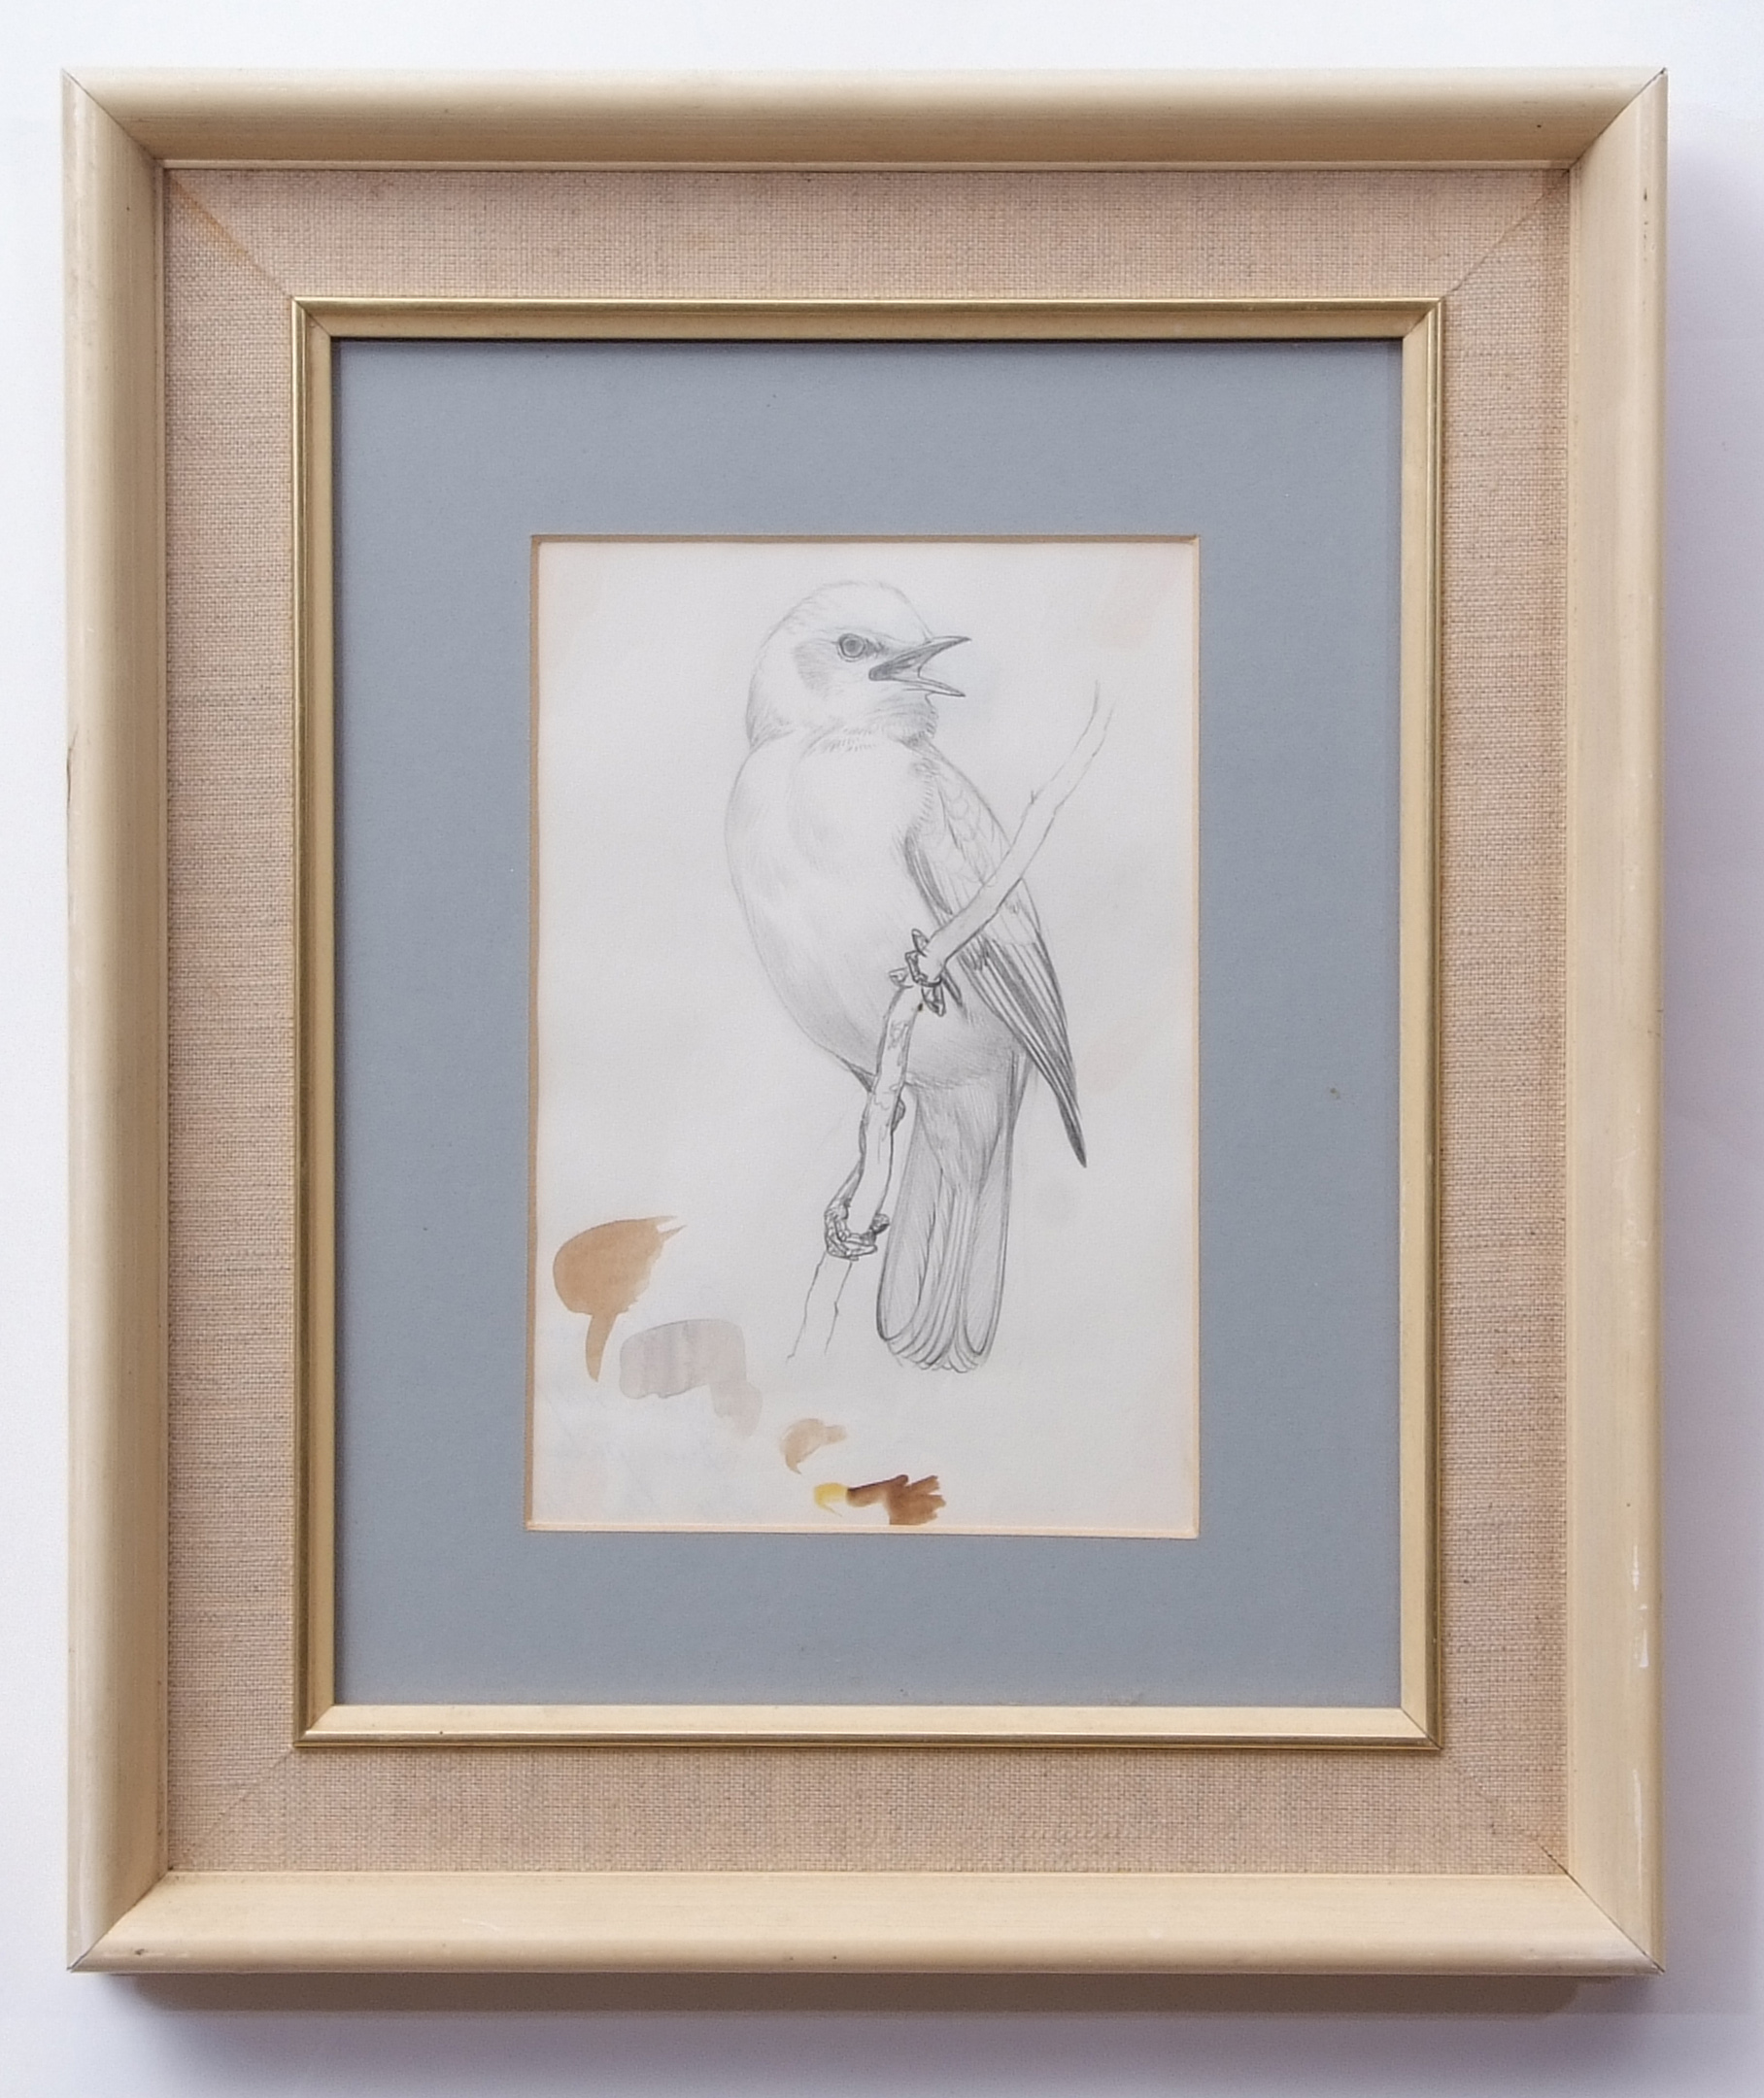 AR DAVID MORRISON HENRY (1919-1977) Bird studies two pencil drawings 17 x 12cms and 19 x 26cms (2) - Image 3 of 3